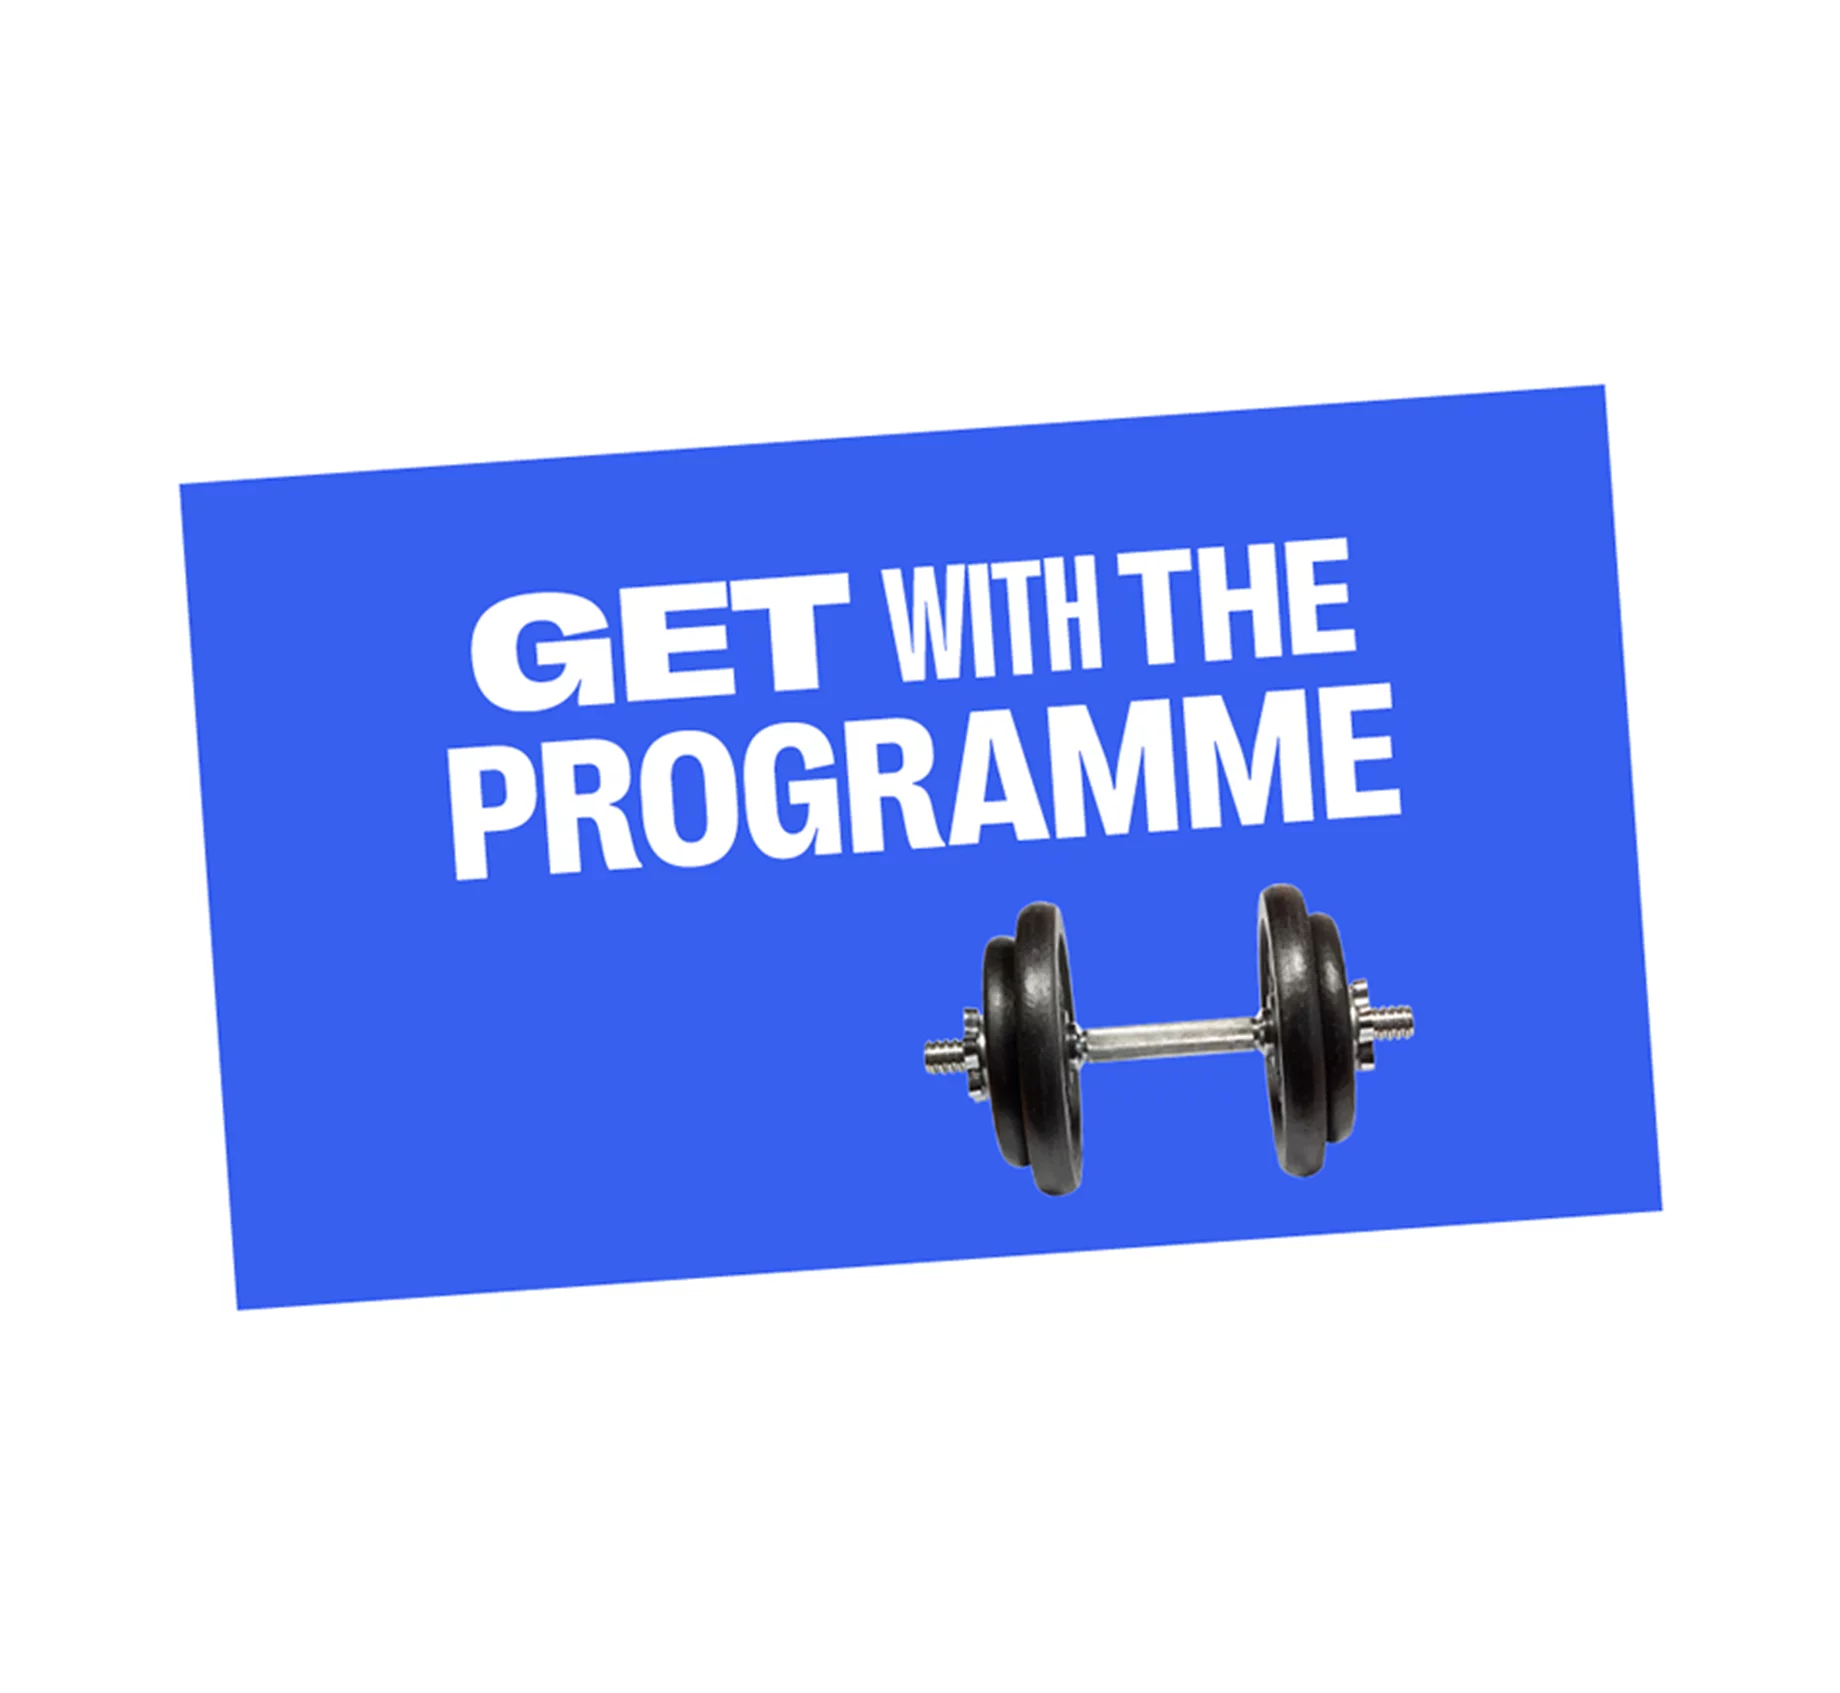 Get with the programme